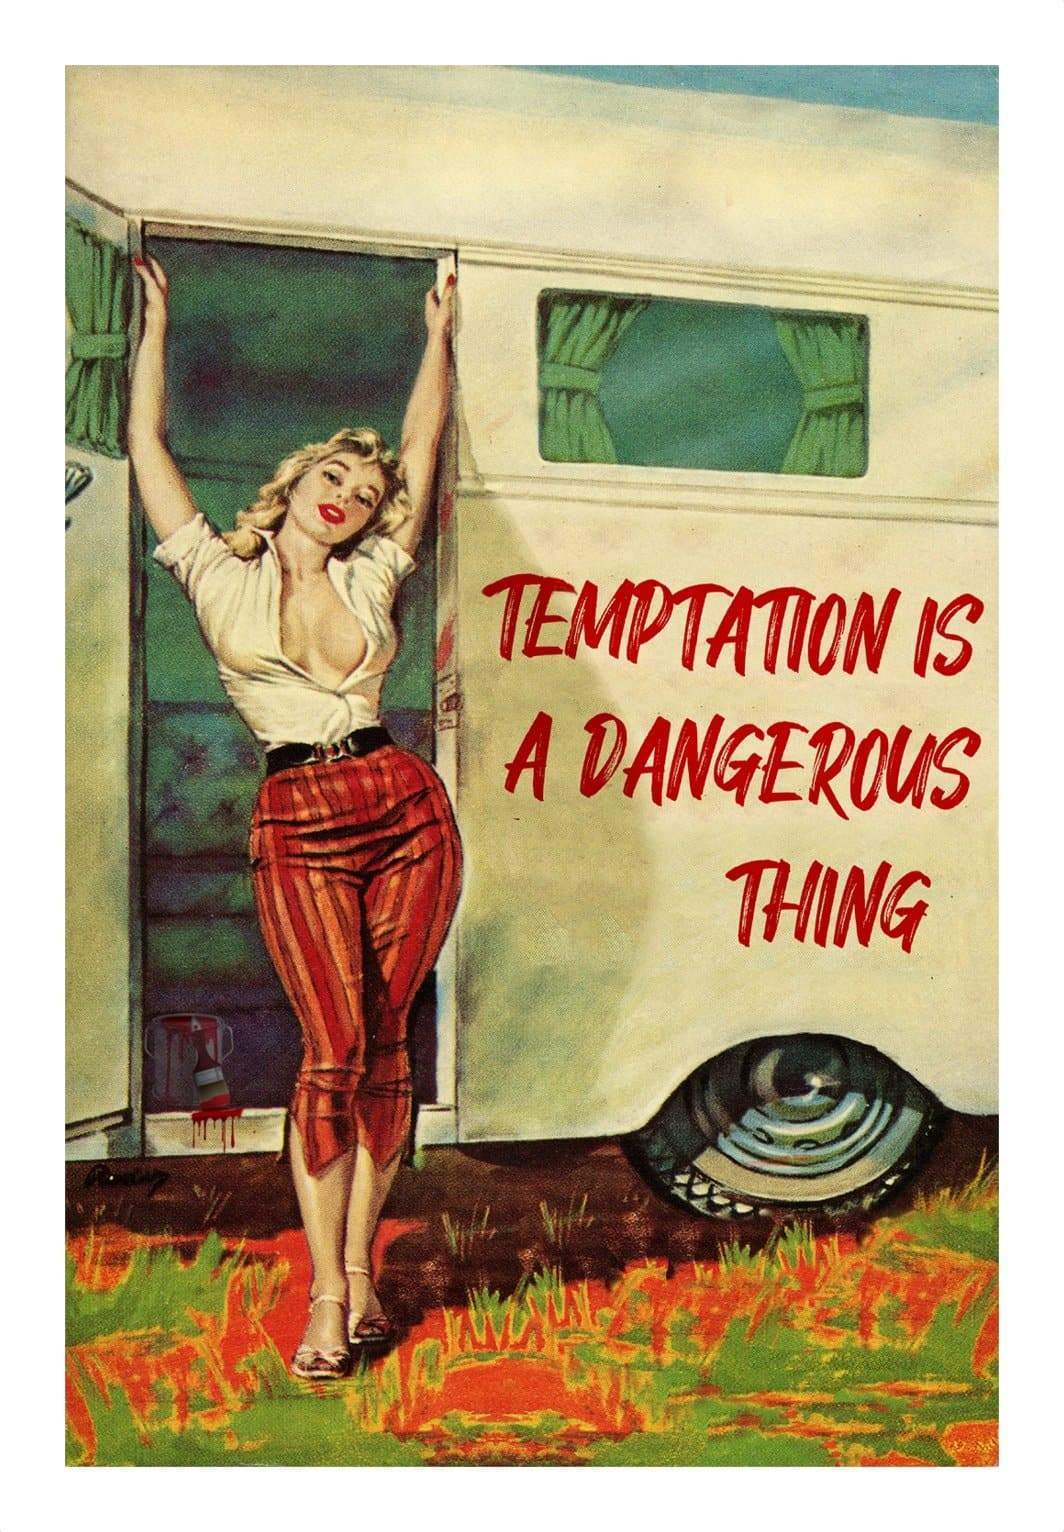 Temptation by Dirty Hans